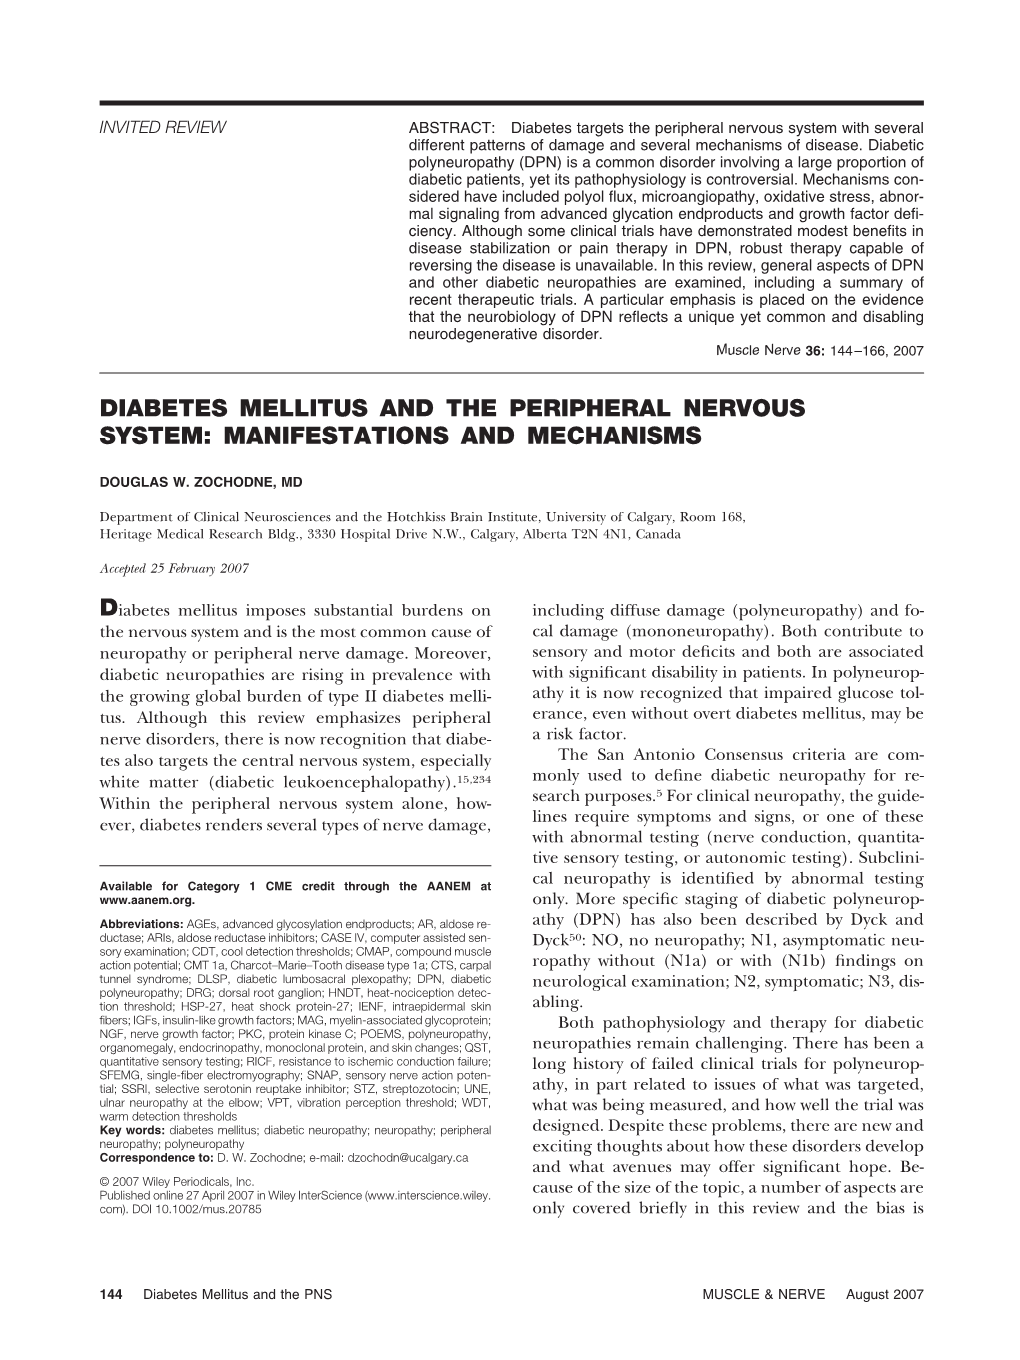 Diabetes Mellitus and the Peripheral Nervous System: Manifestations and Mechanisms